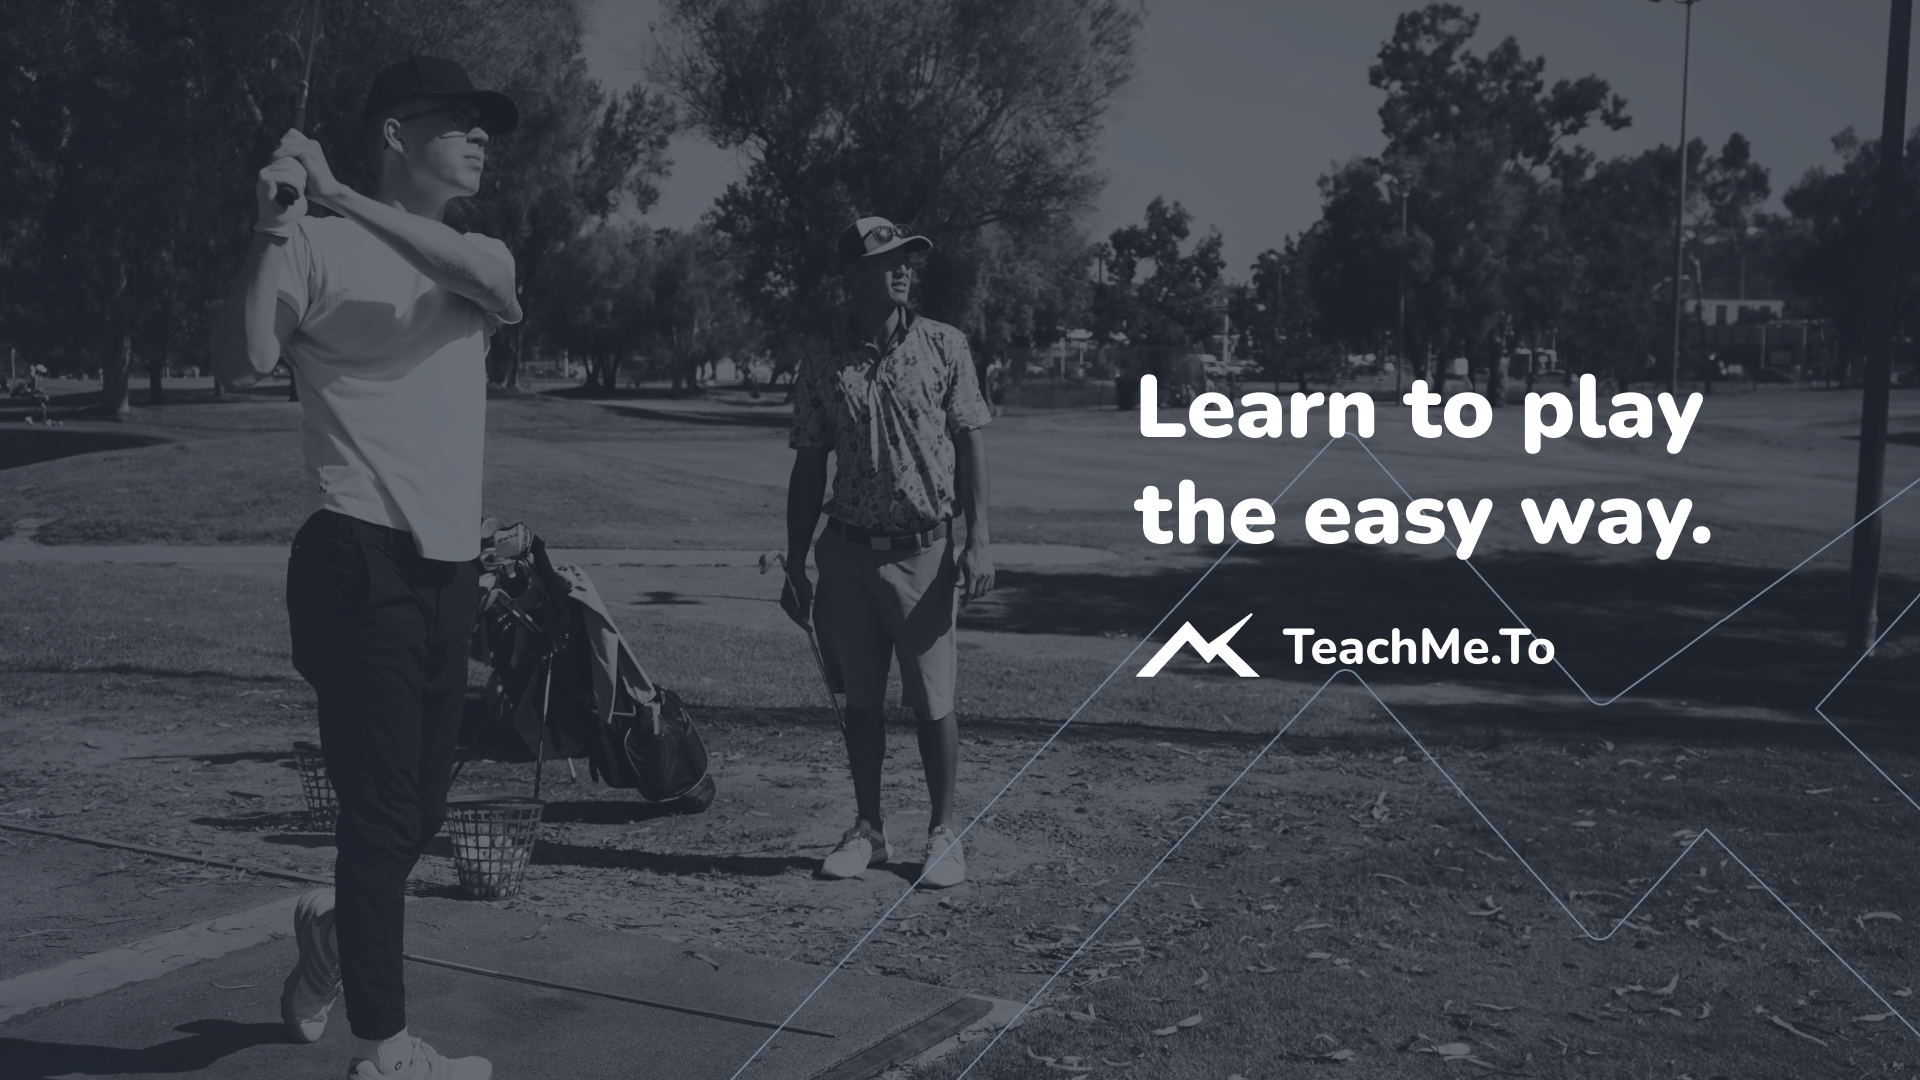 two golfers teeing off with the teachme.to logo